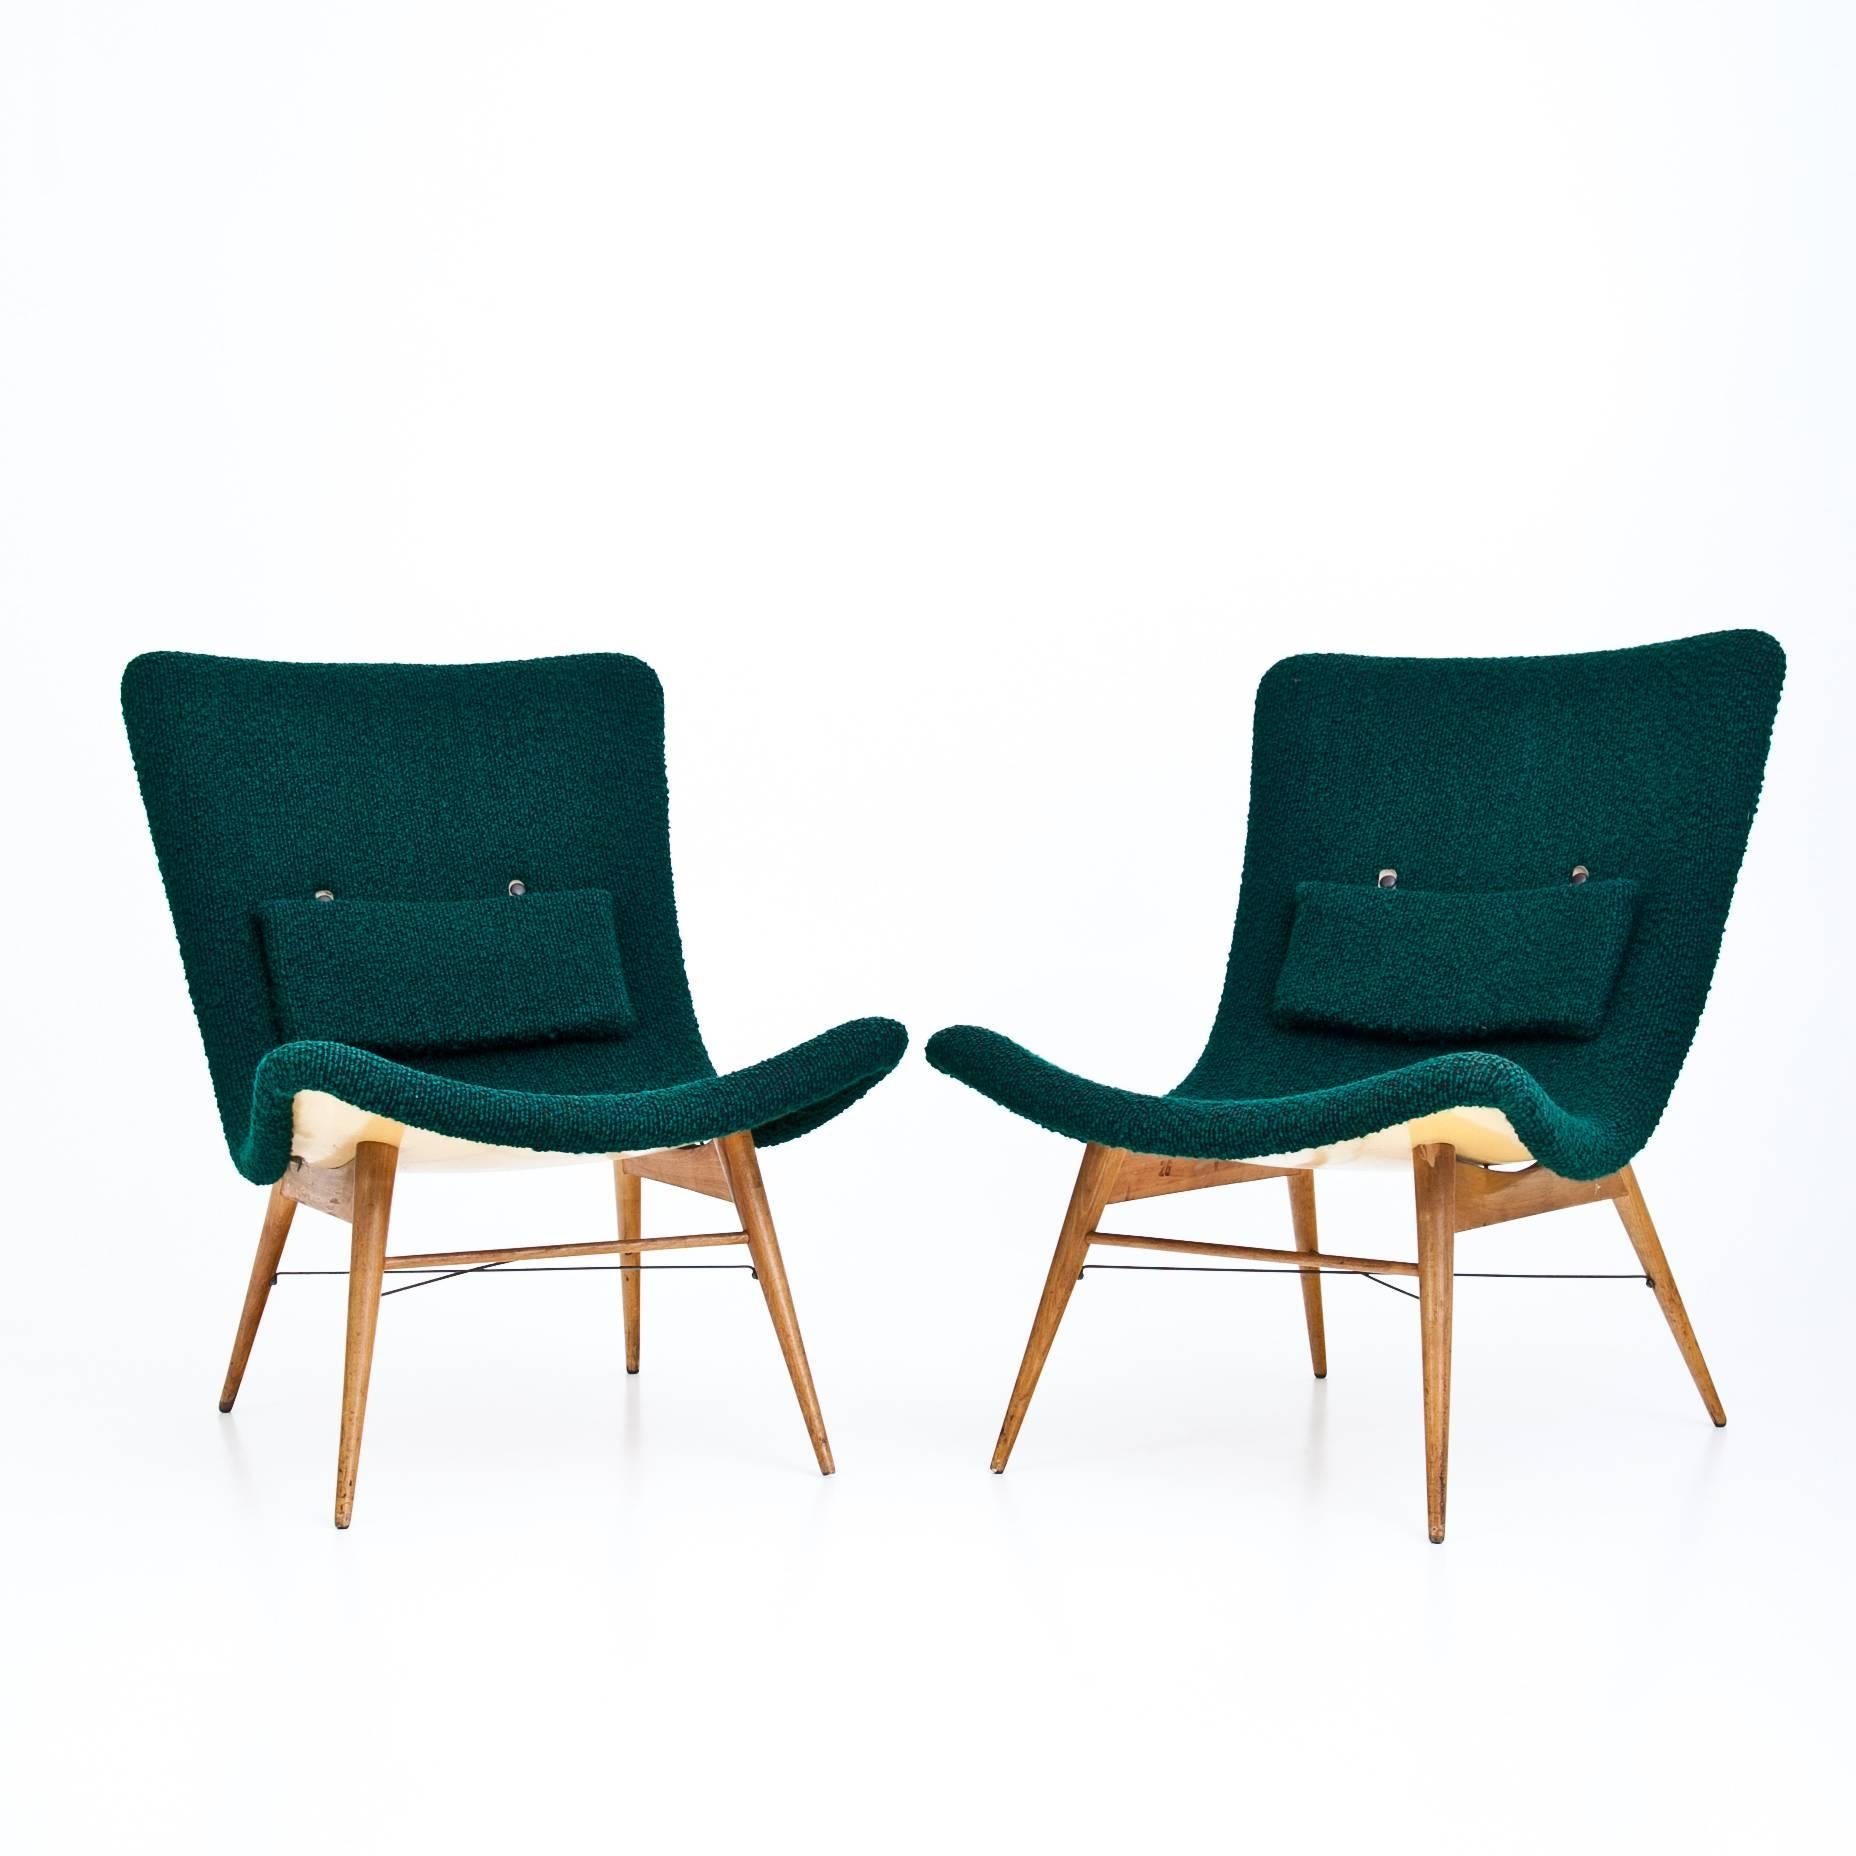 Pair of Czechoslovakian lounge chairs designed by Miroslav Navrátil for Ceský Nábytek. The chairs stand on flared, conical legs with crossed wire strutting, green upholstered seat and a light yellow back. The chairs are numbered K33848 and K33849